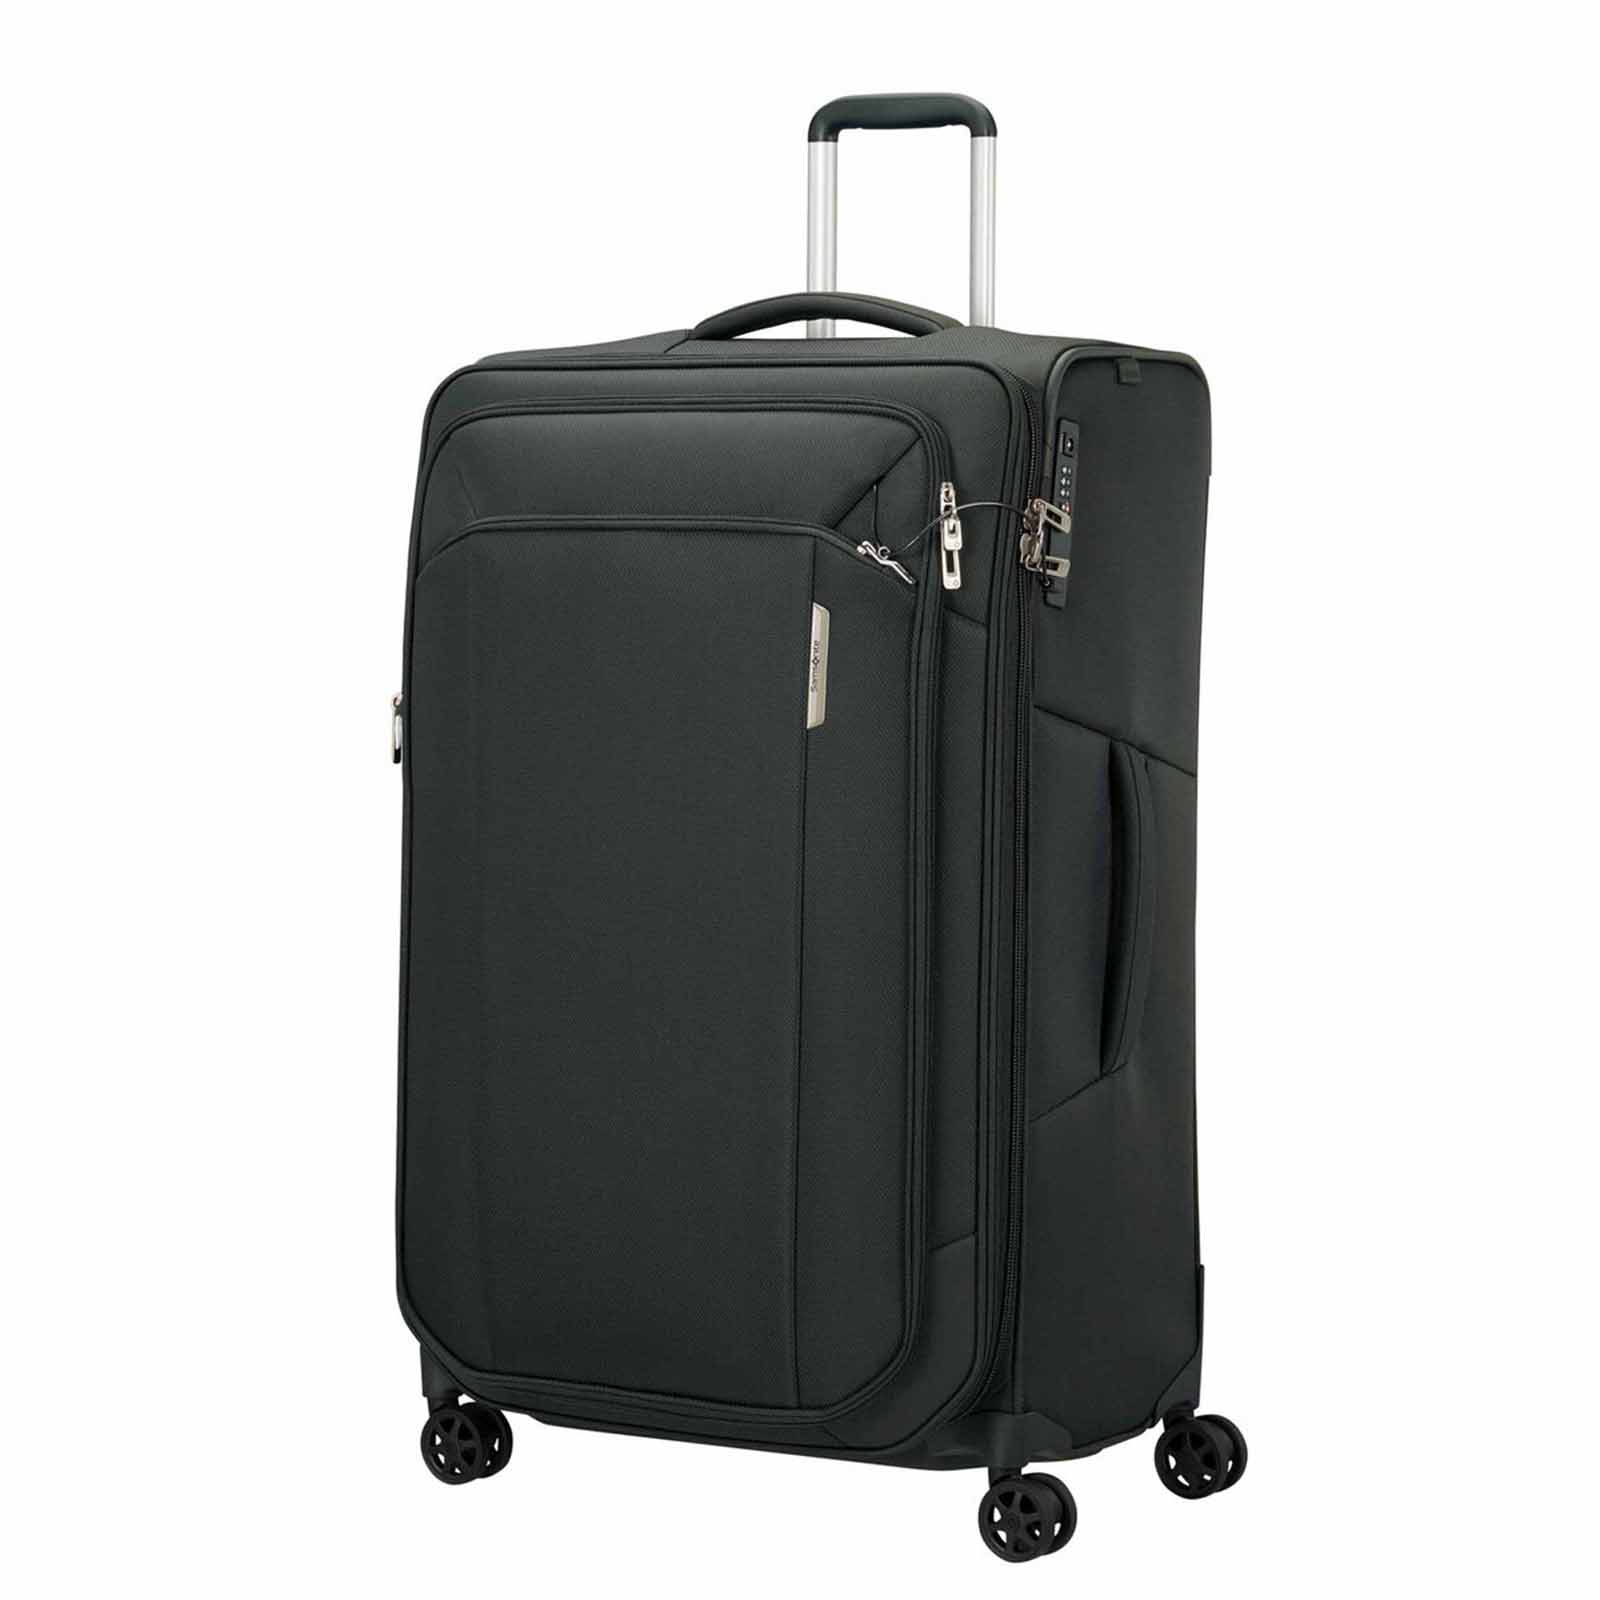 Samsonite-Respark-78cm-Suitcase-Forest-Green-Front-Angle